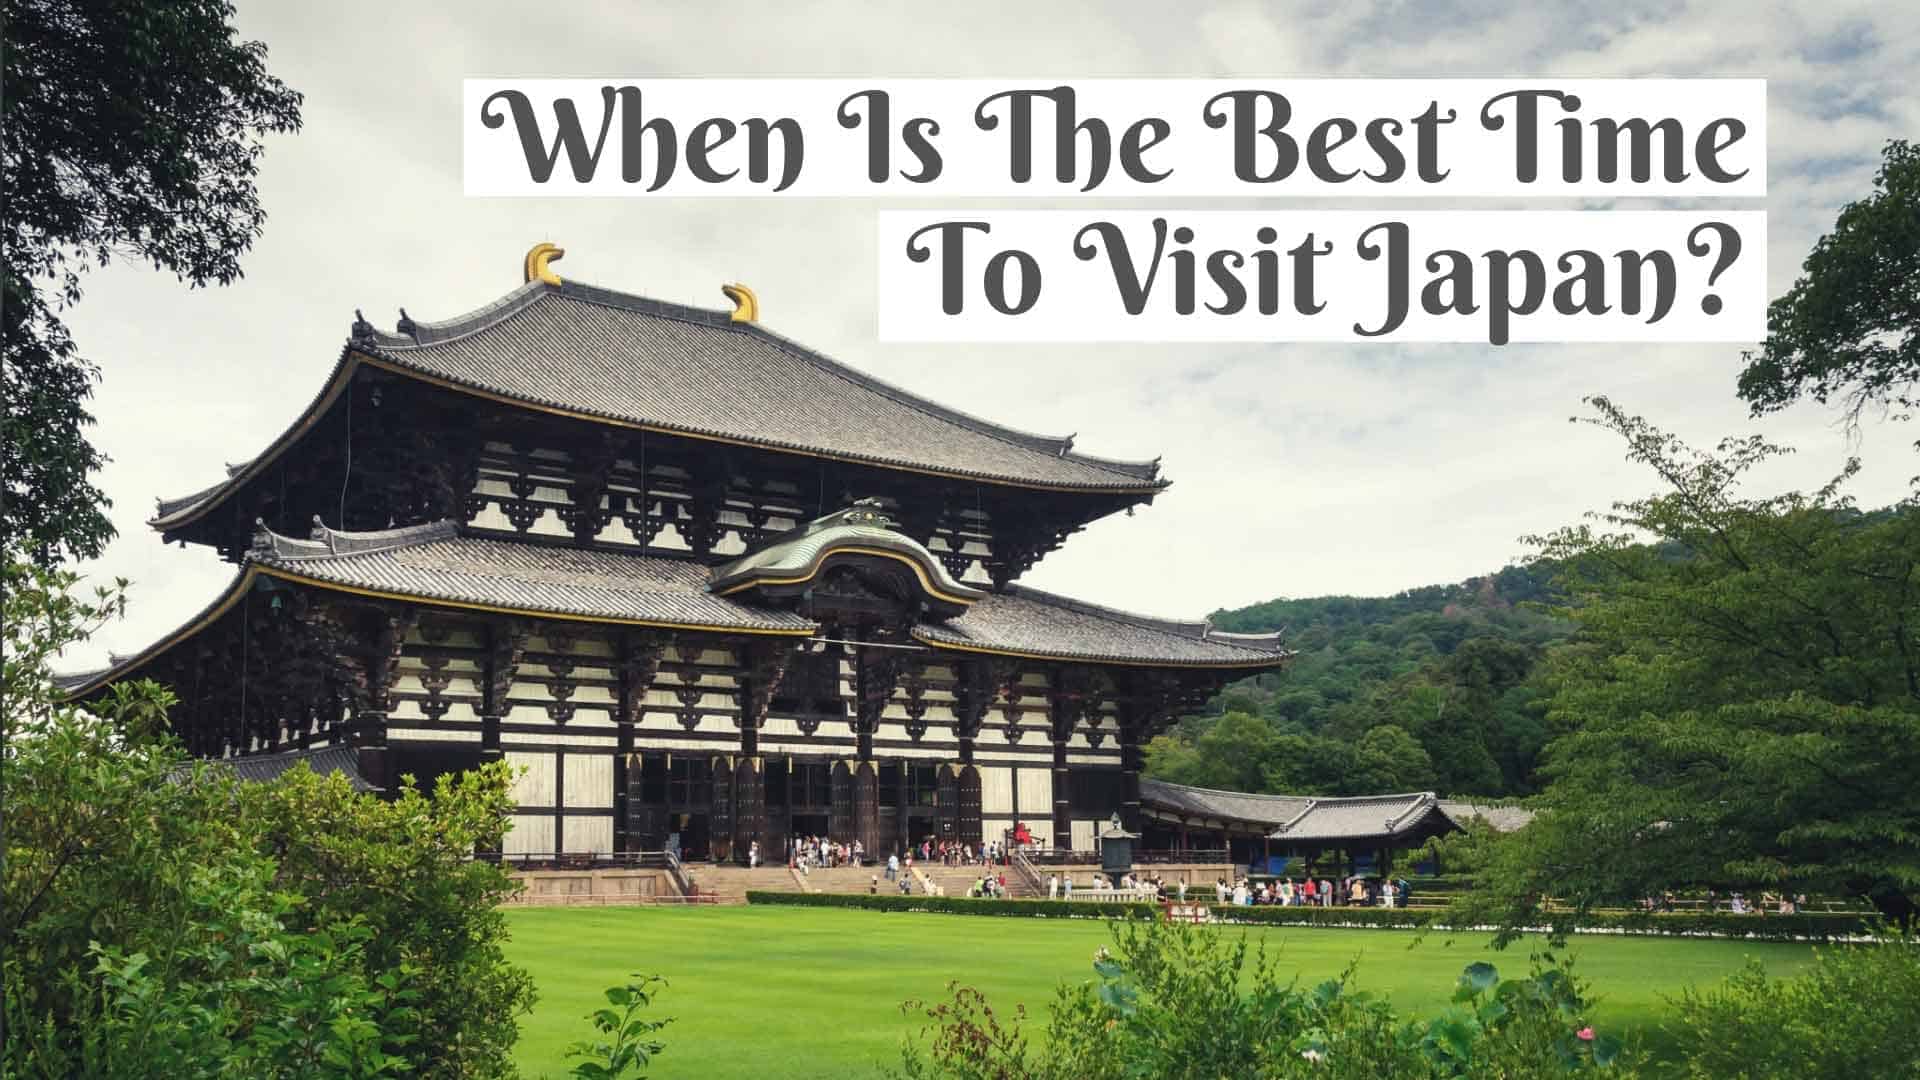 The Best Time to Visit